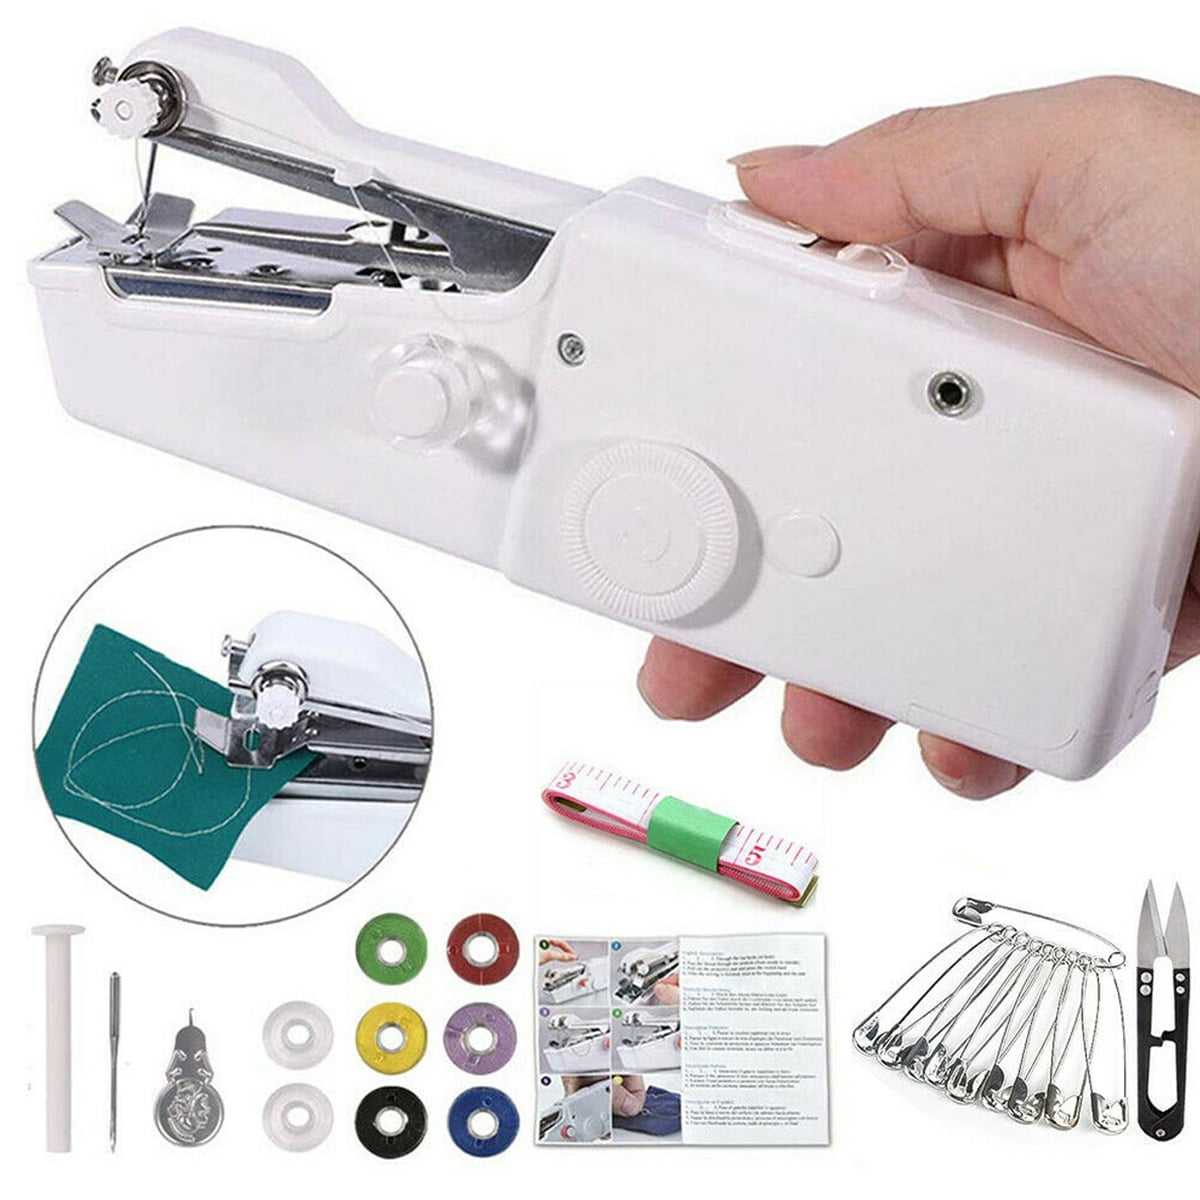 EXCEART 4 Pcs Pocket Sewing Machine Diy Hand Stitching Machine Sew Quick  Dollhouse Sewing Machine Automatic Thread Sewing Machine Portable Sew Hand